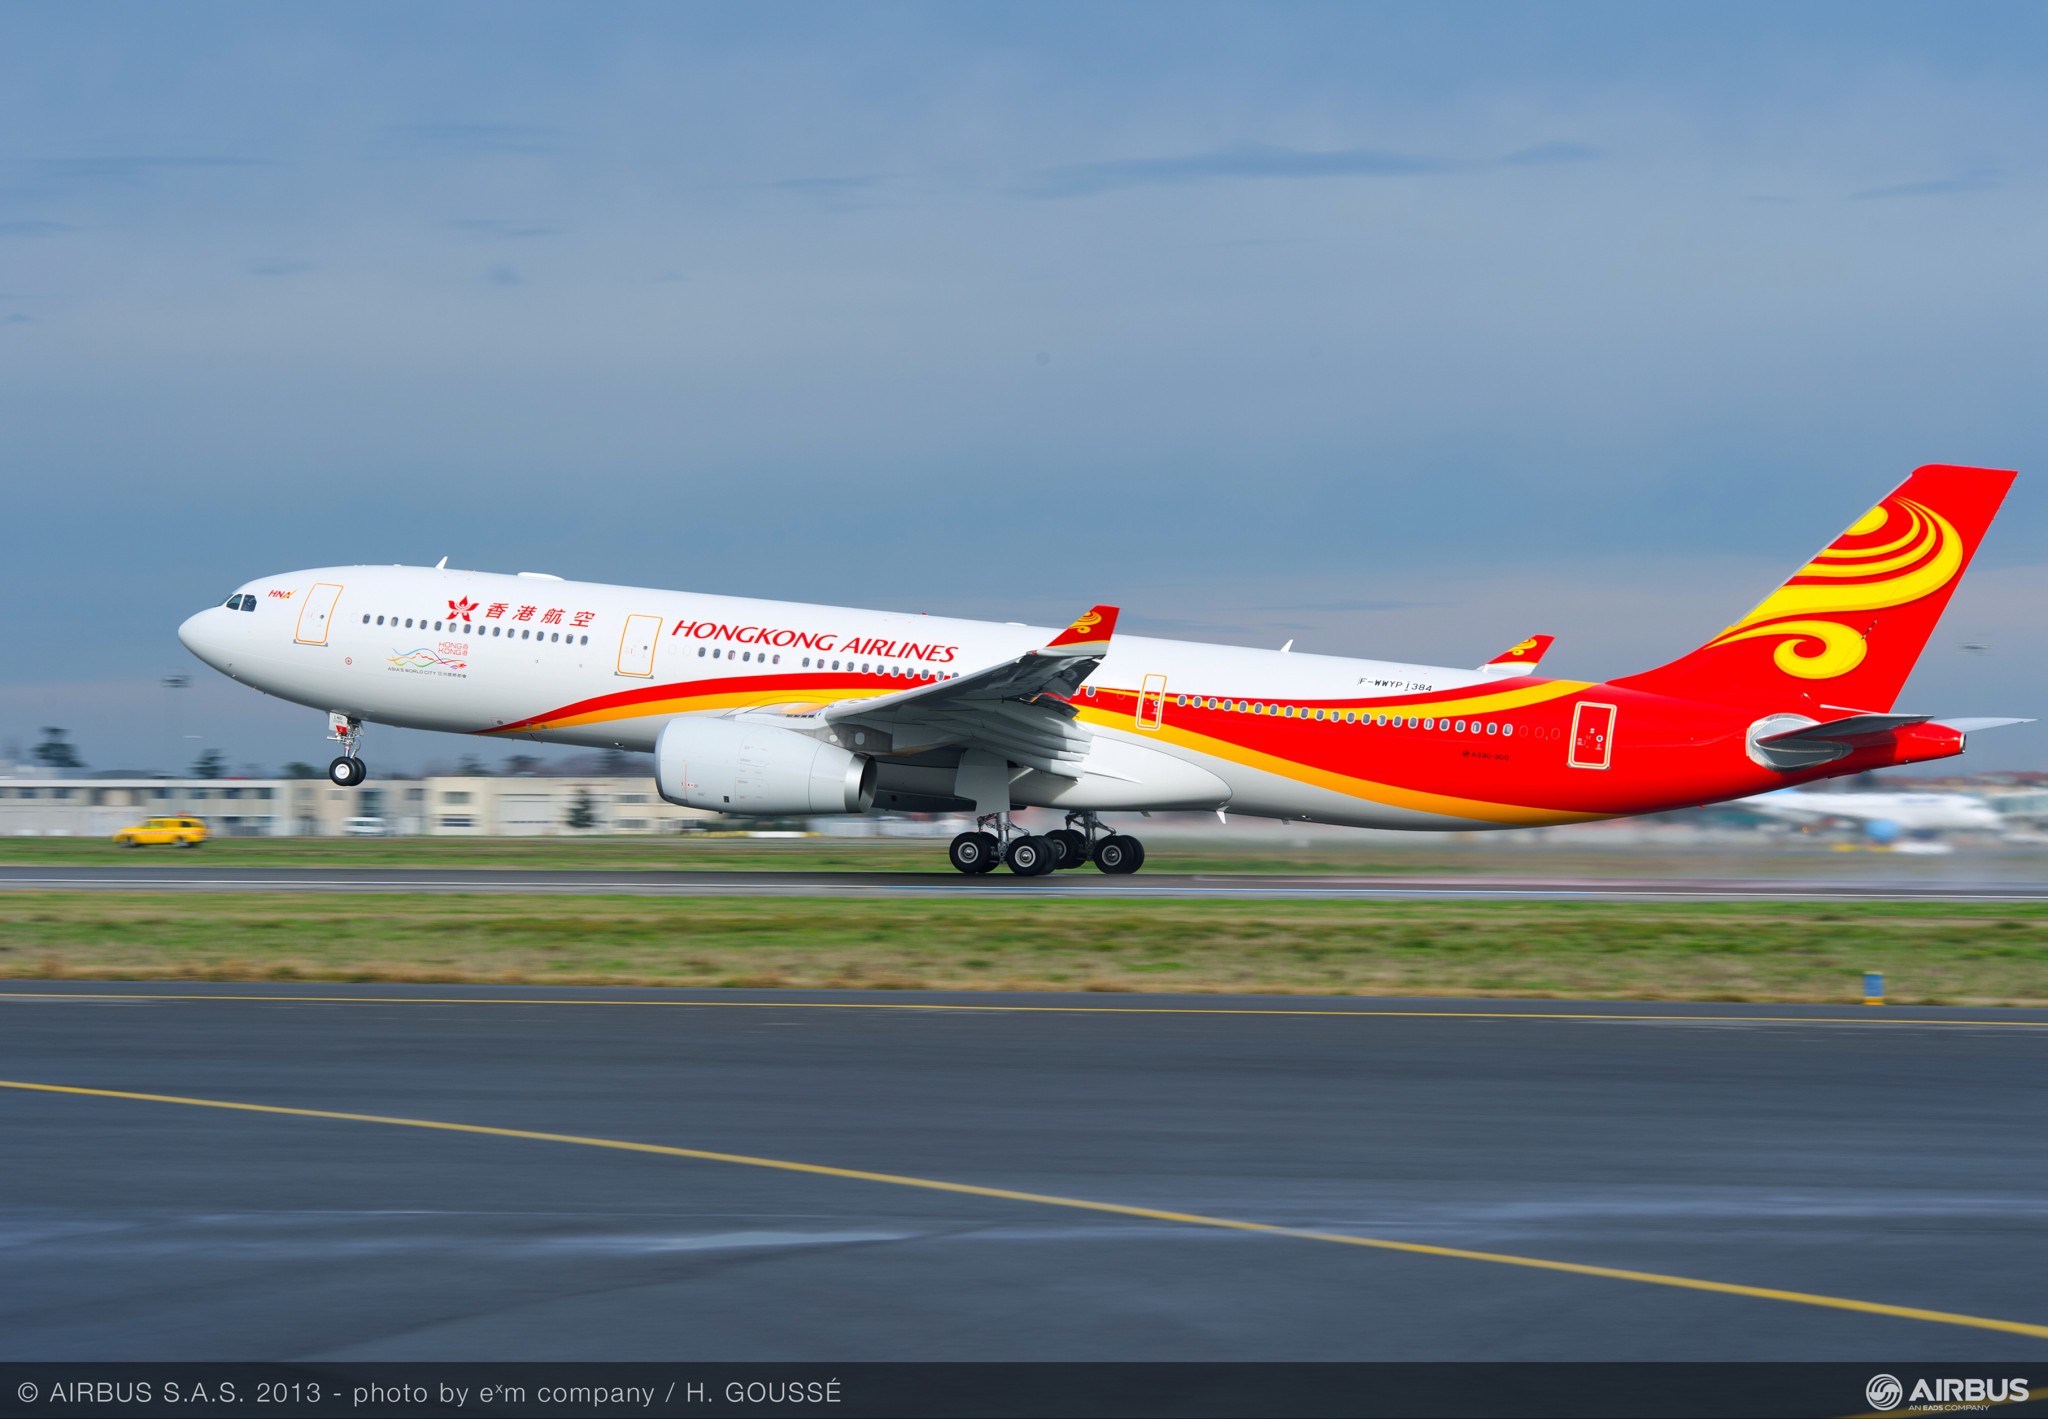 Hong Kong Airlines chooses Airbus’ FHS-TSP solution to cover its fleet of 21 A350s